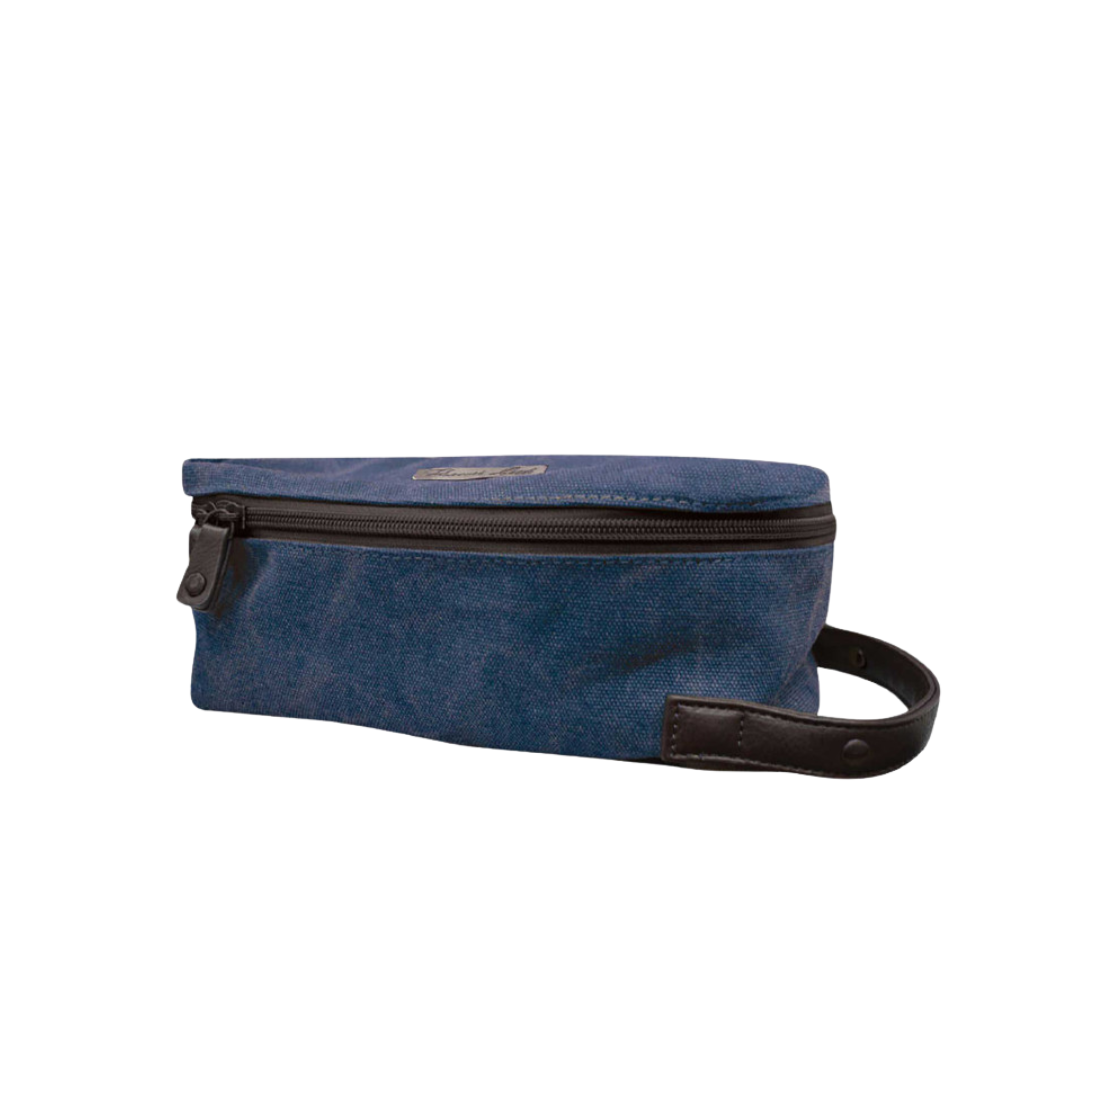 Thomas Cook Toiletry Bag OS Navy Accessories by Thomas Cook | The Bloke Shop